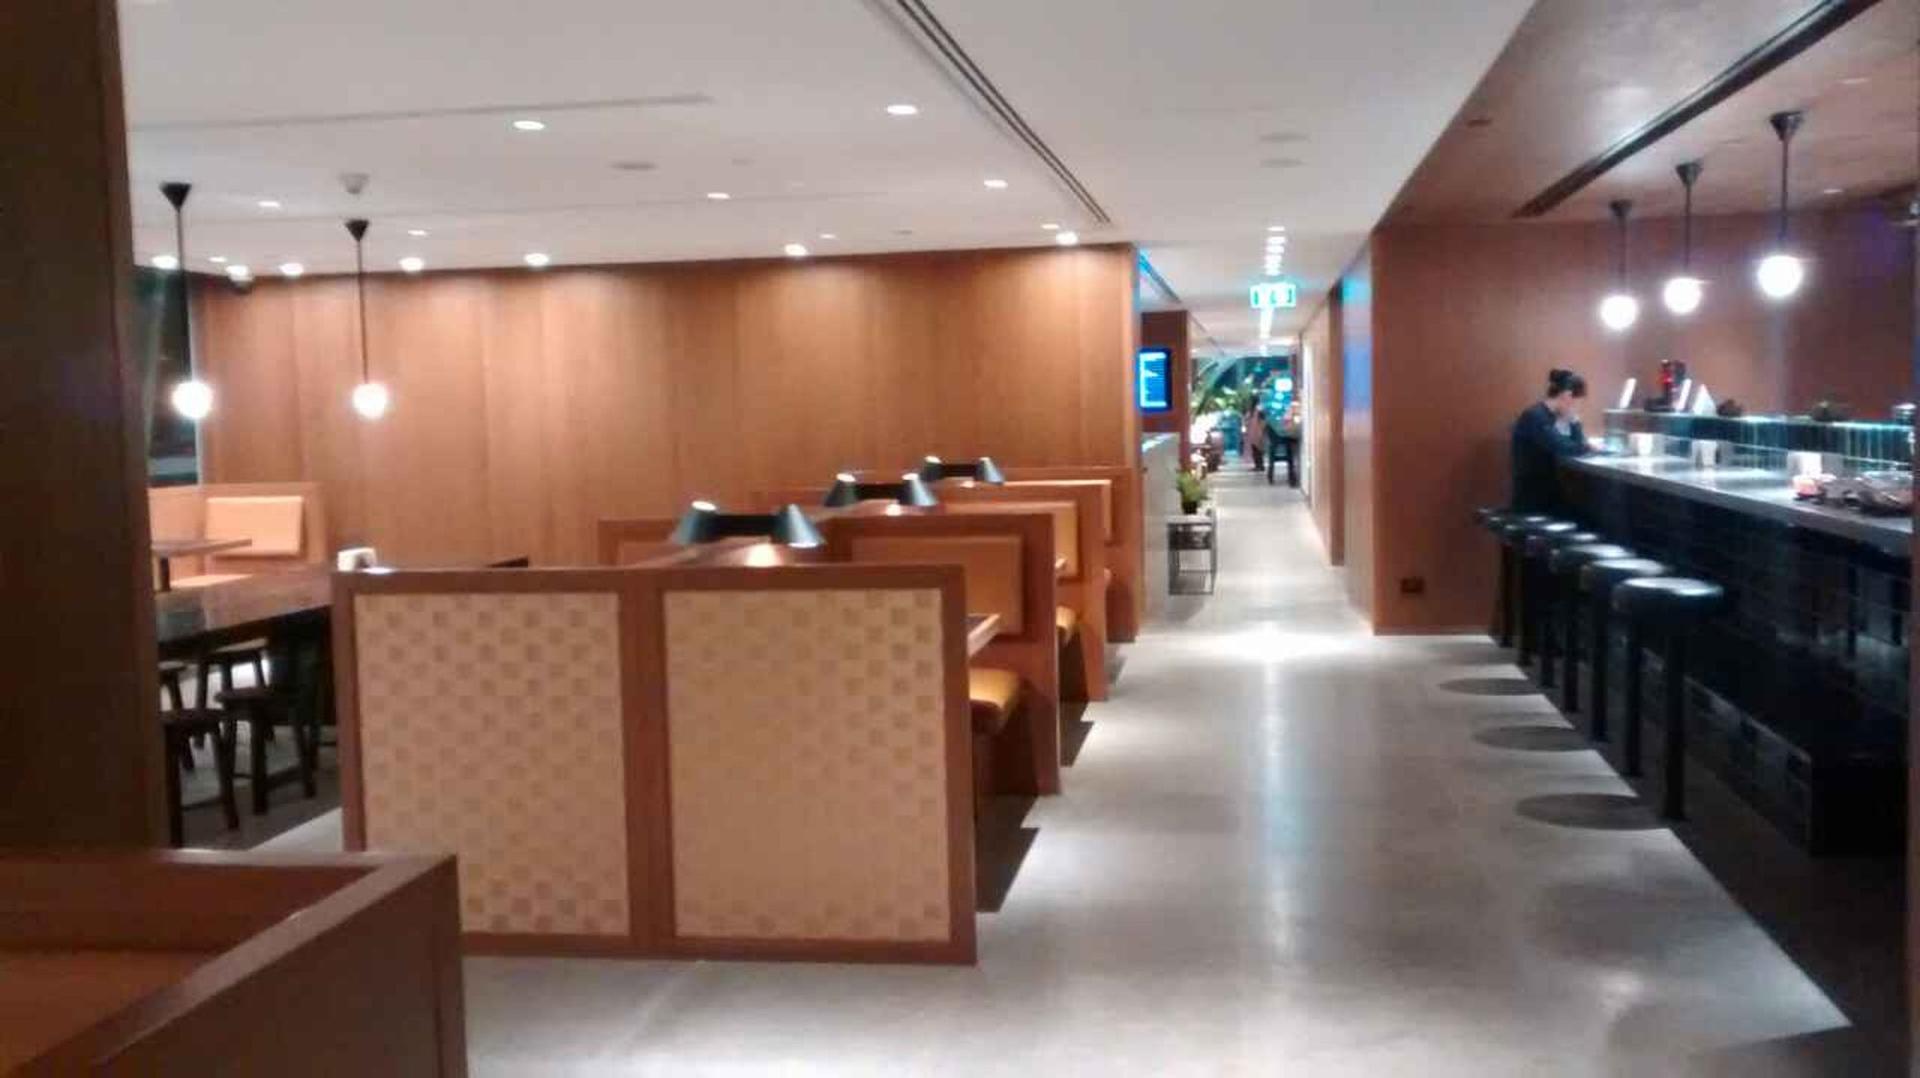 Cathay Pacific First and Business Class Lounge image 37 of 69